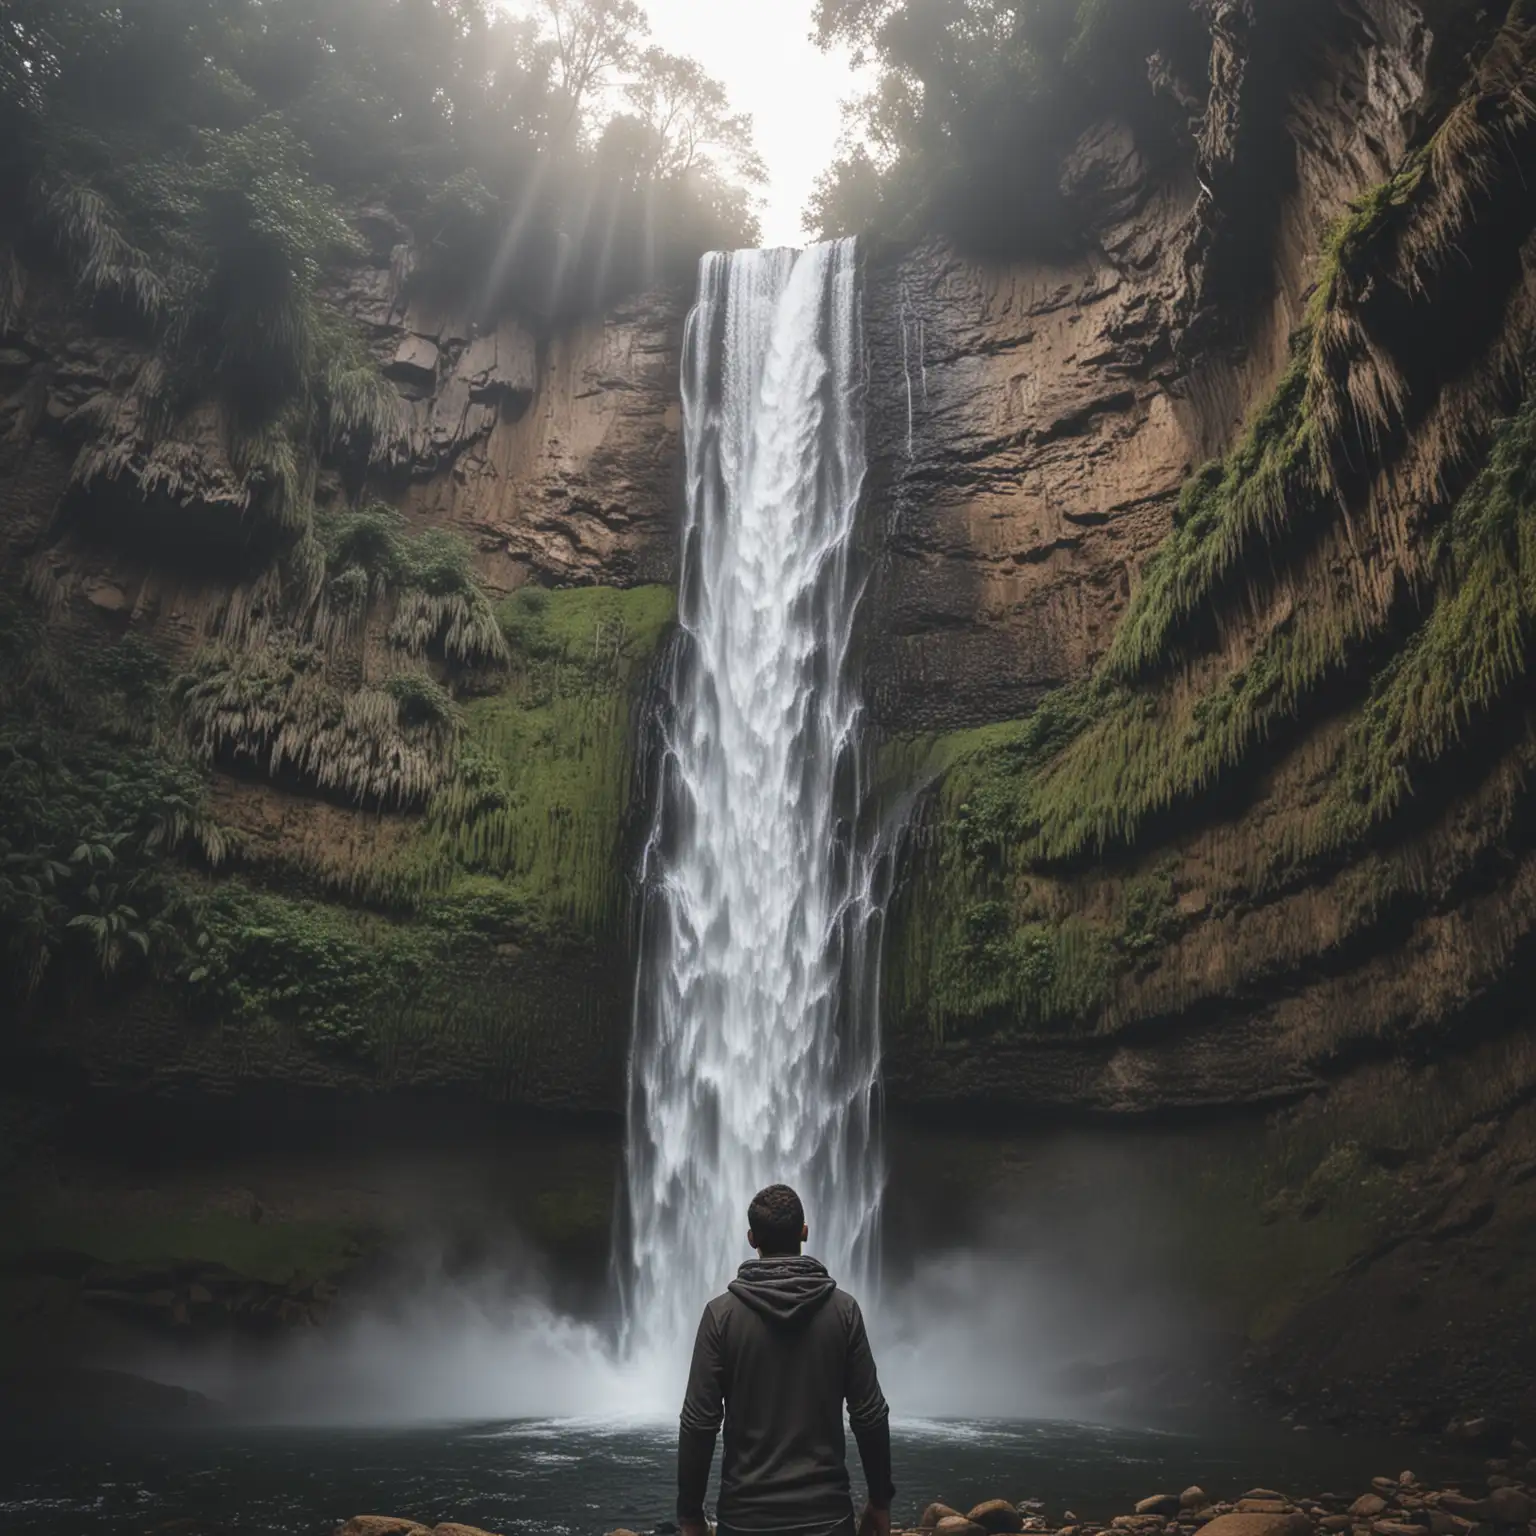 Man Gazing Up at Majestic Waterfall in Wide View